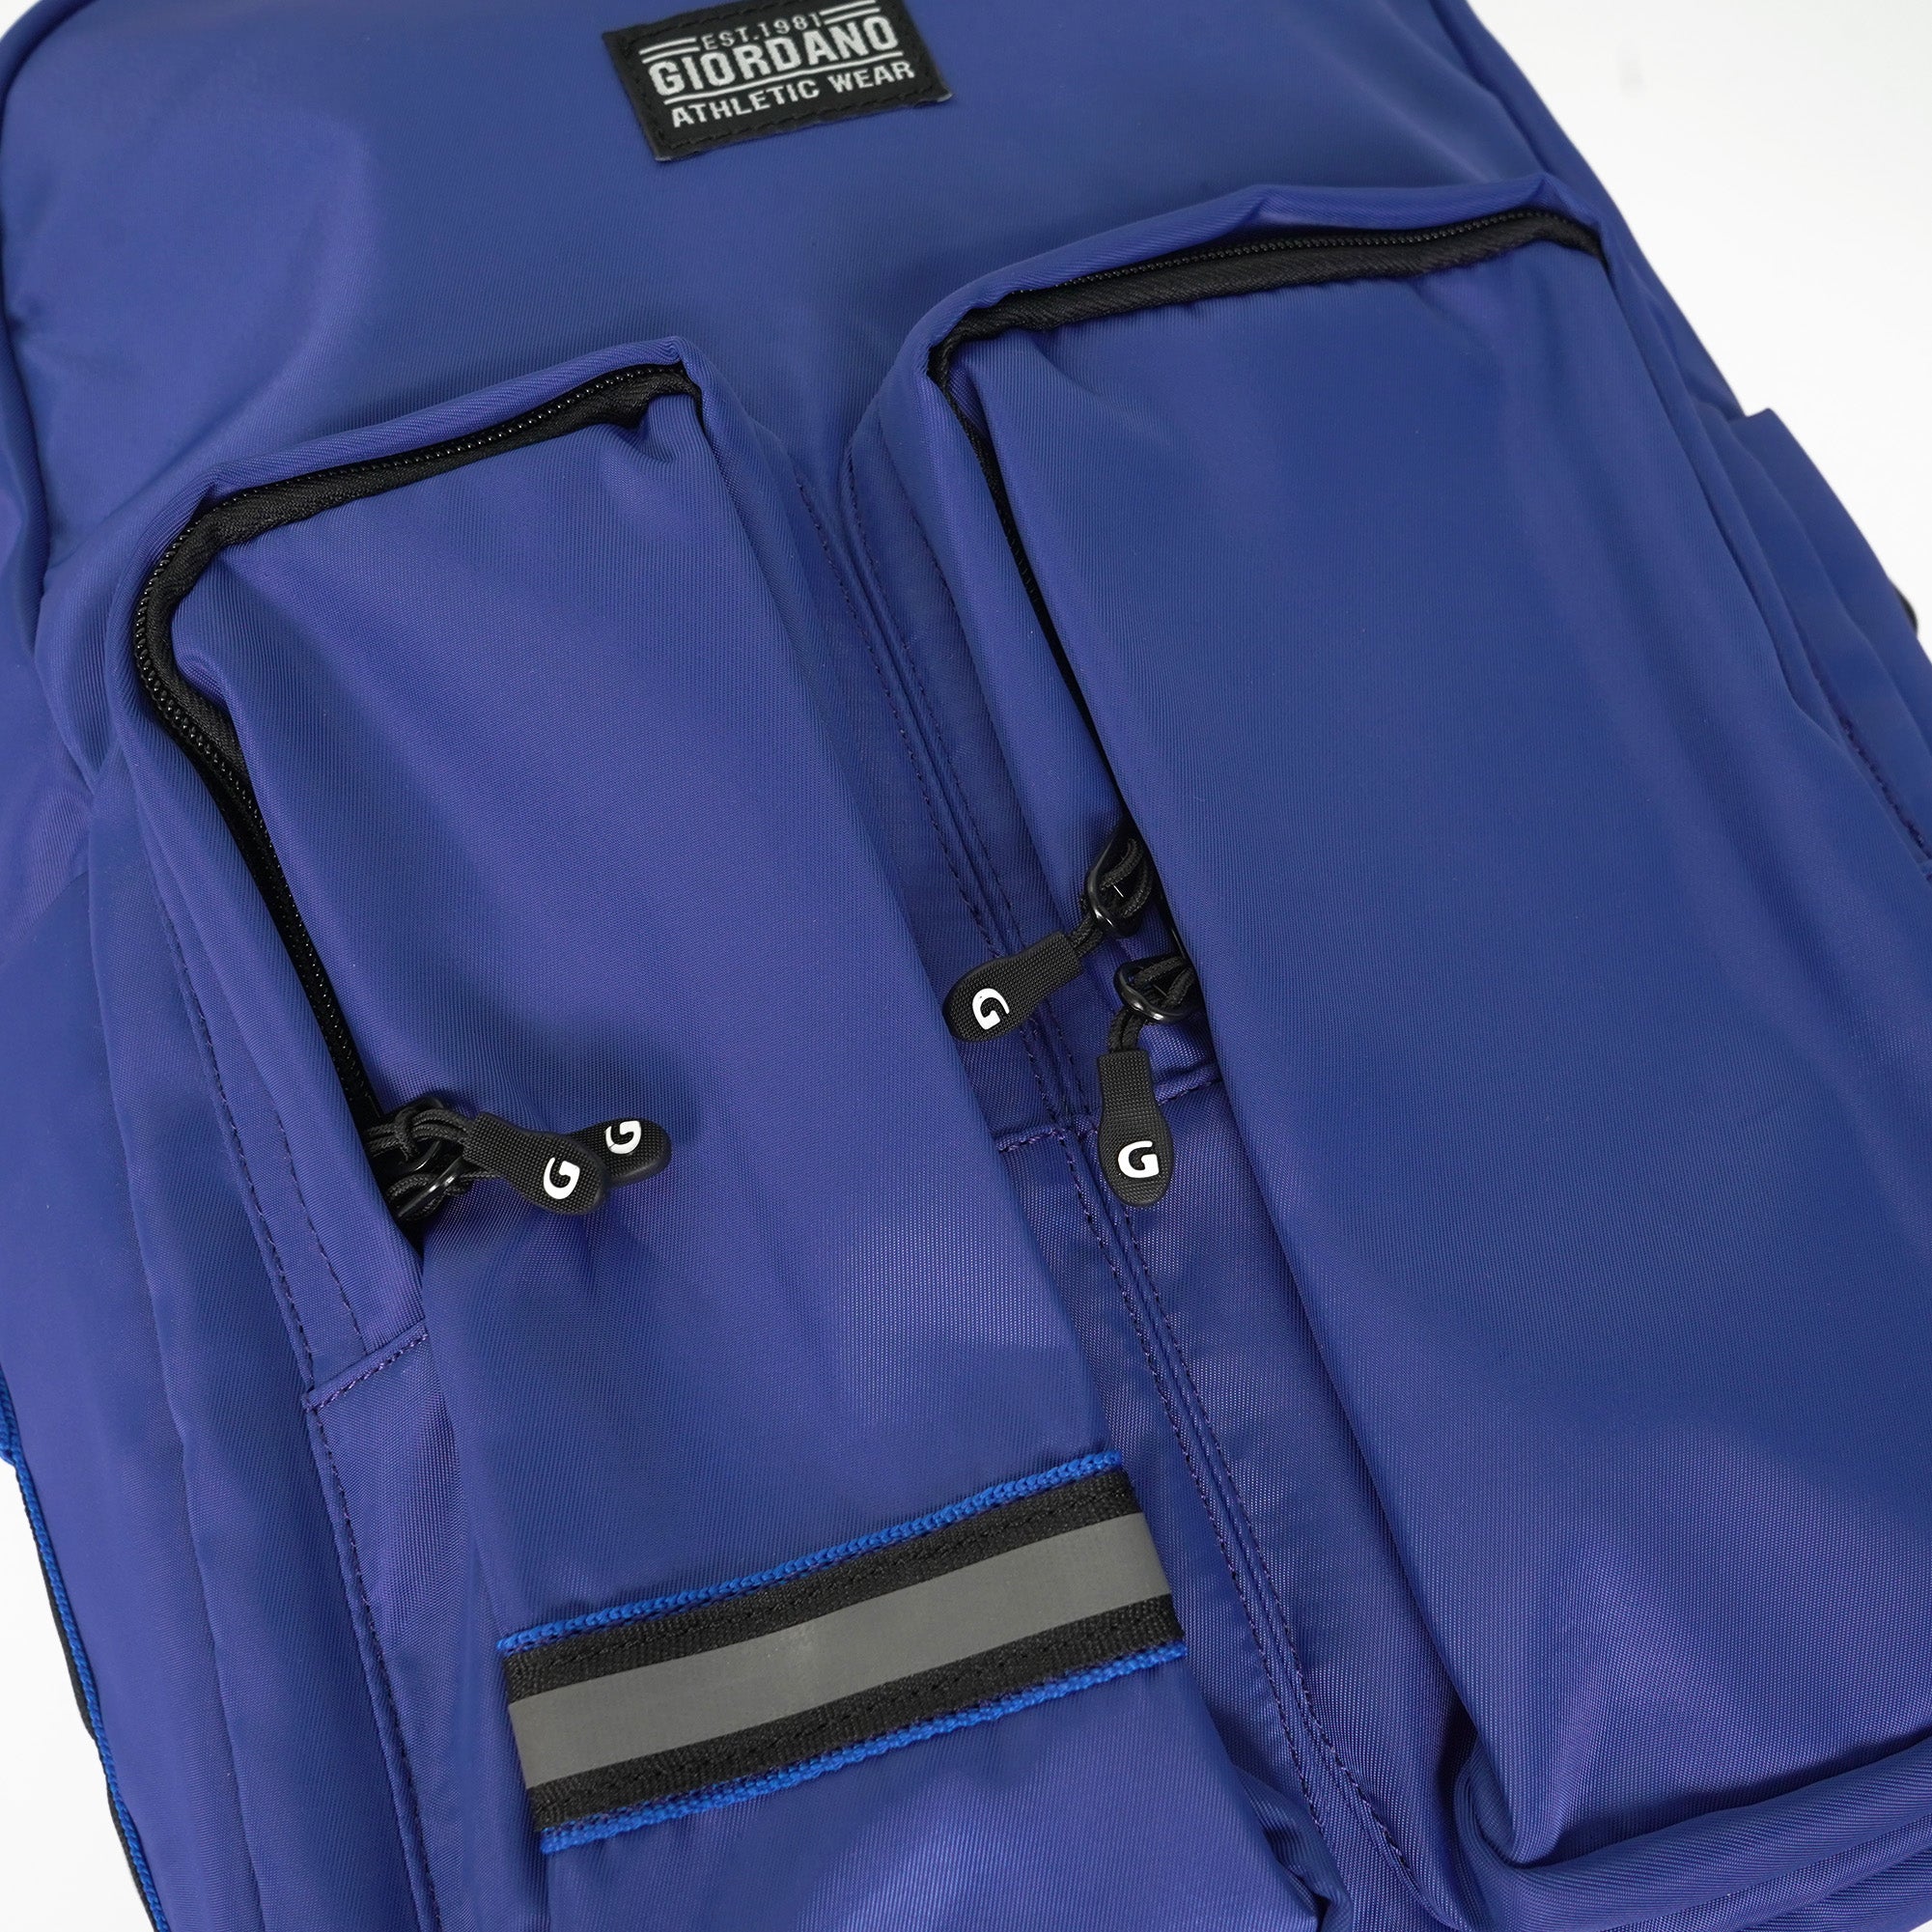 POLYESTER BACKPACK